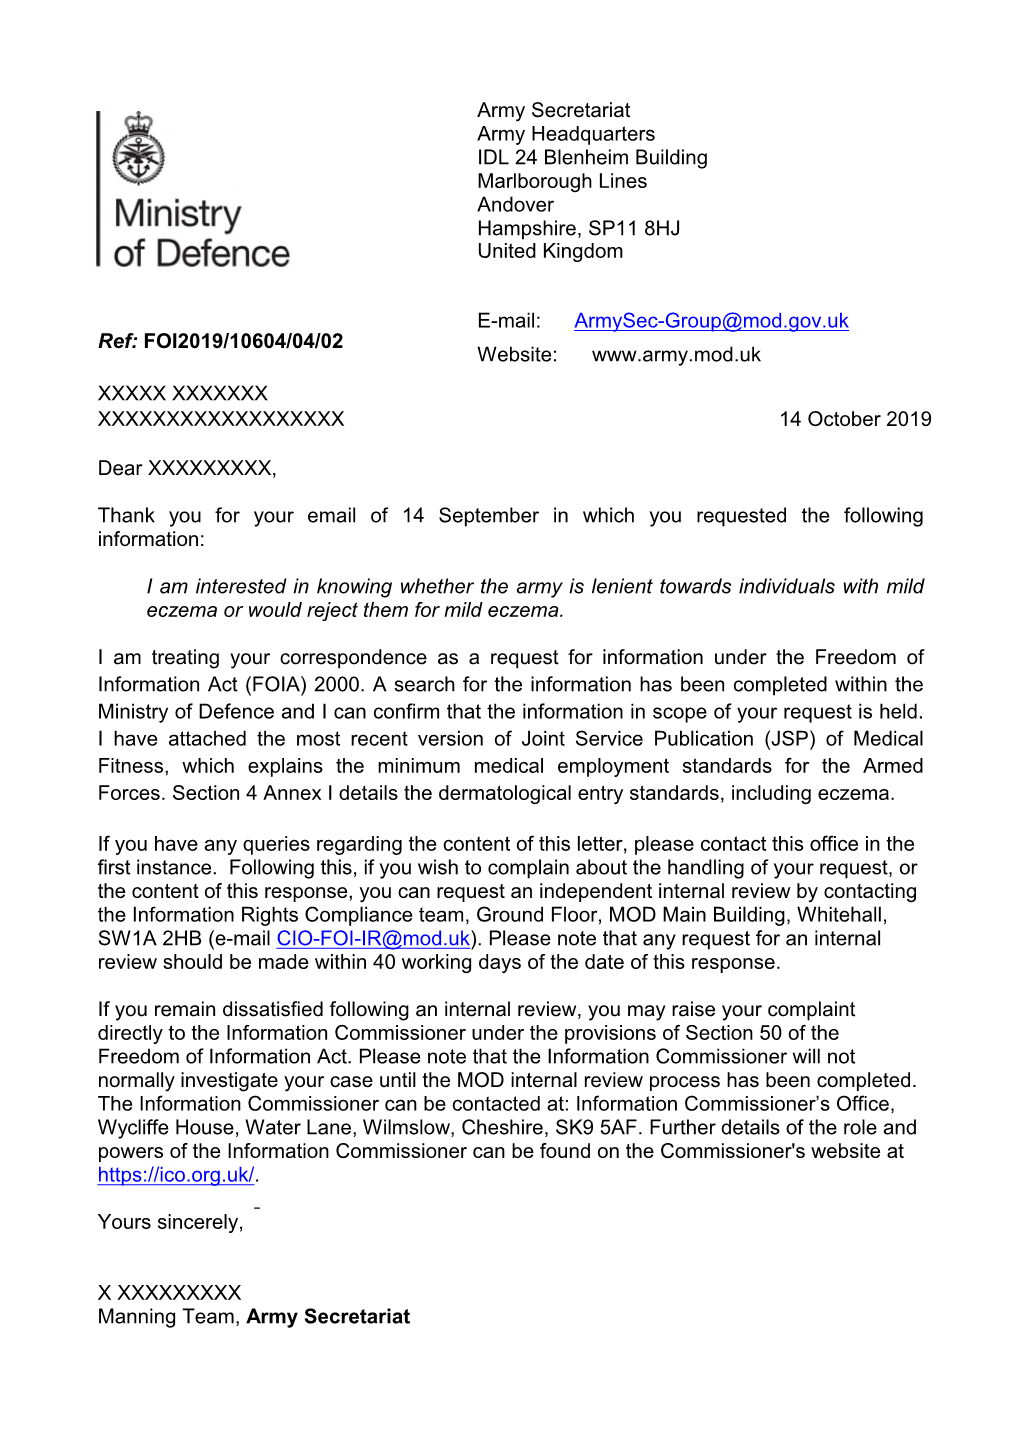 Information Regarding Whether the Army Would Accept Applicants Who Have Eczema